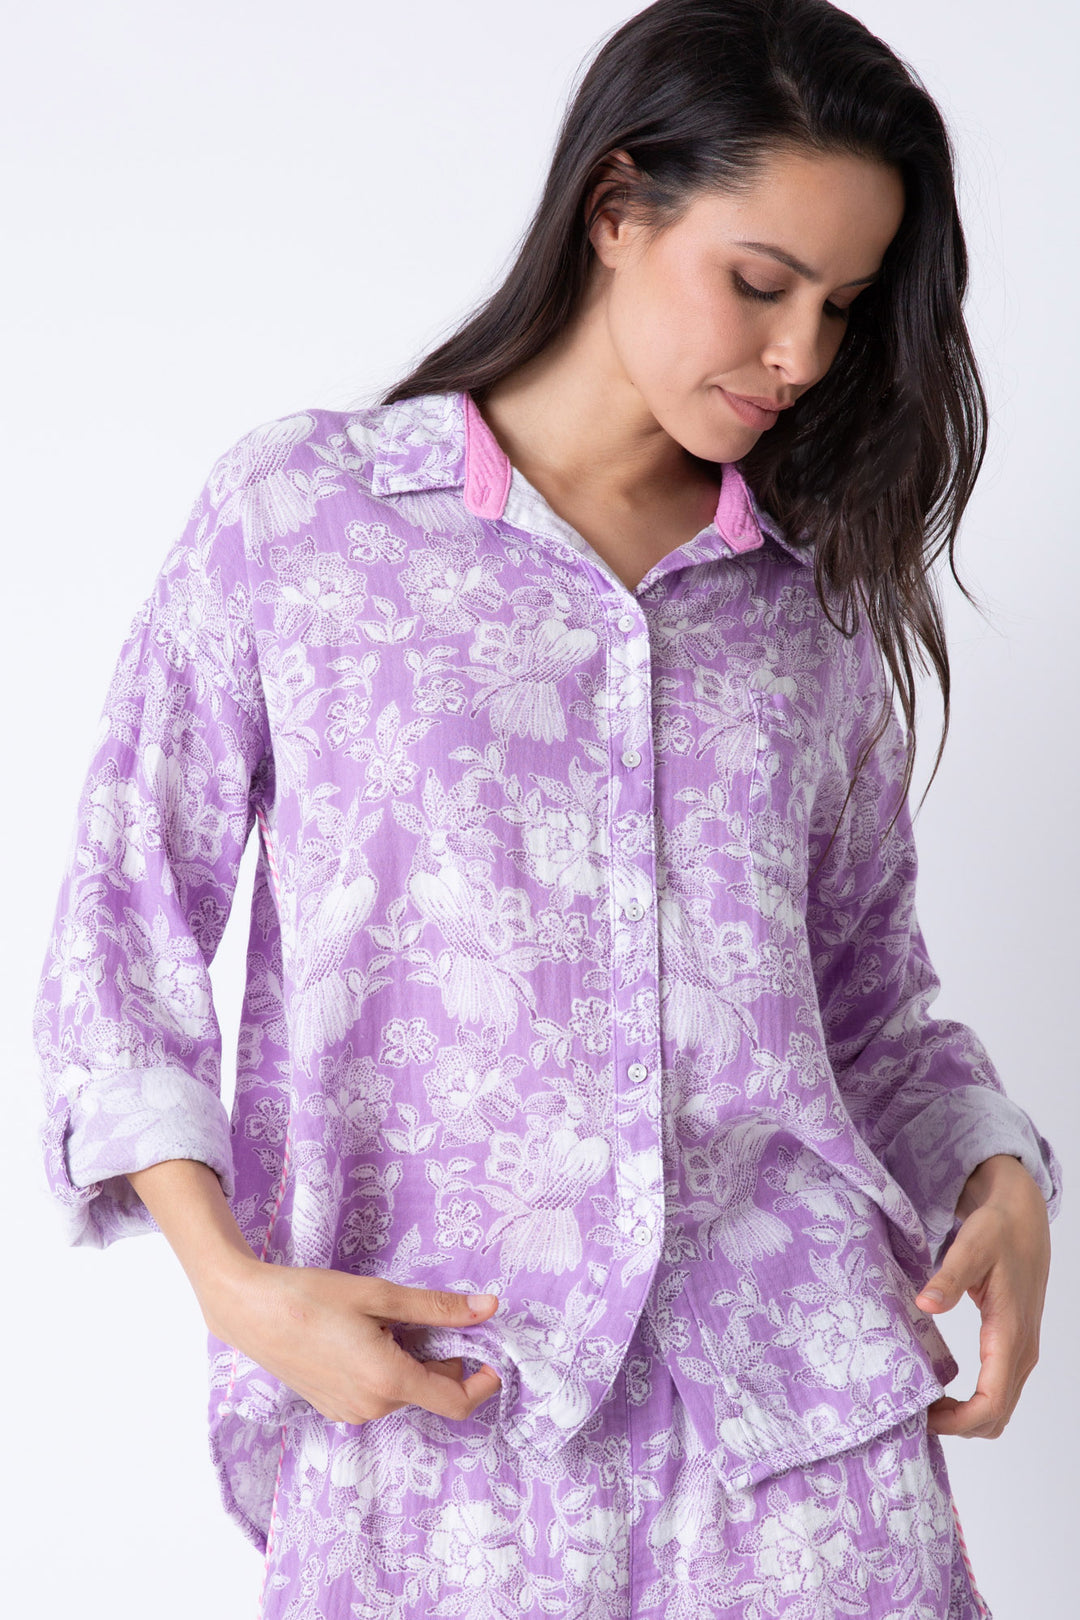 Cotton gauze women's button-down collared shirt in pale purple floral.